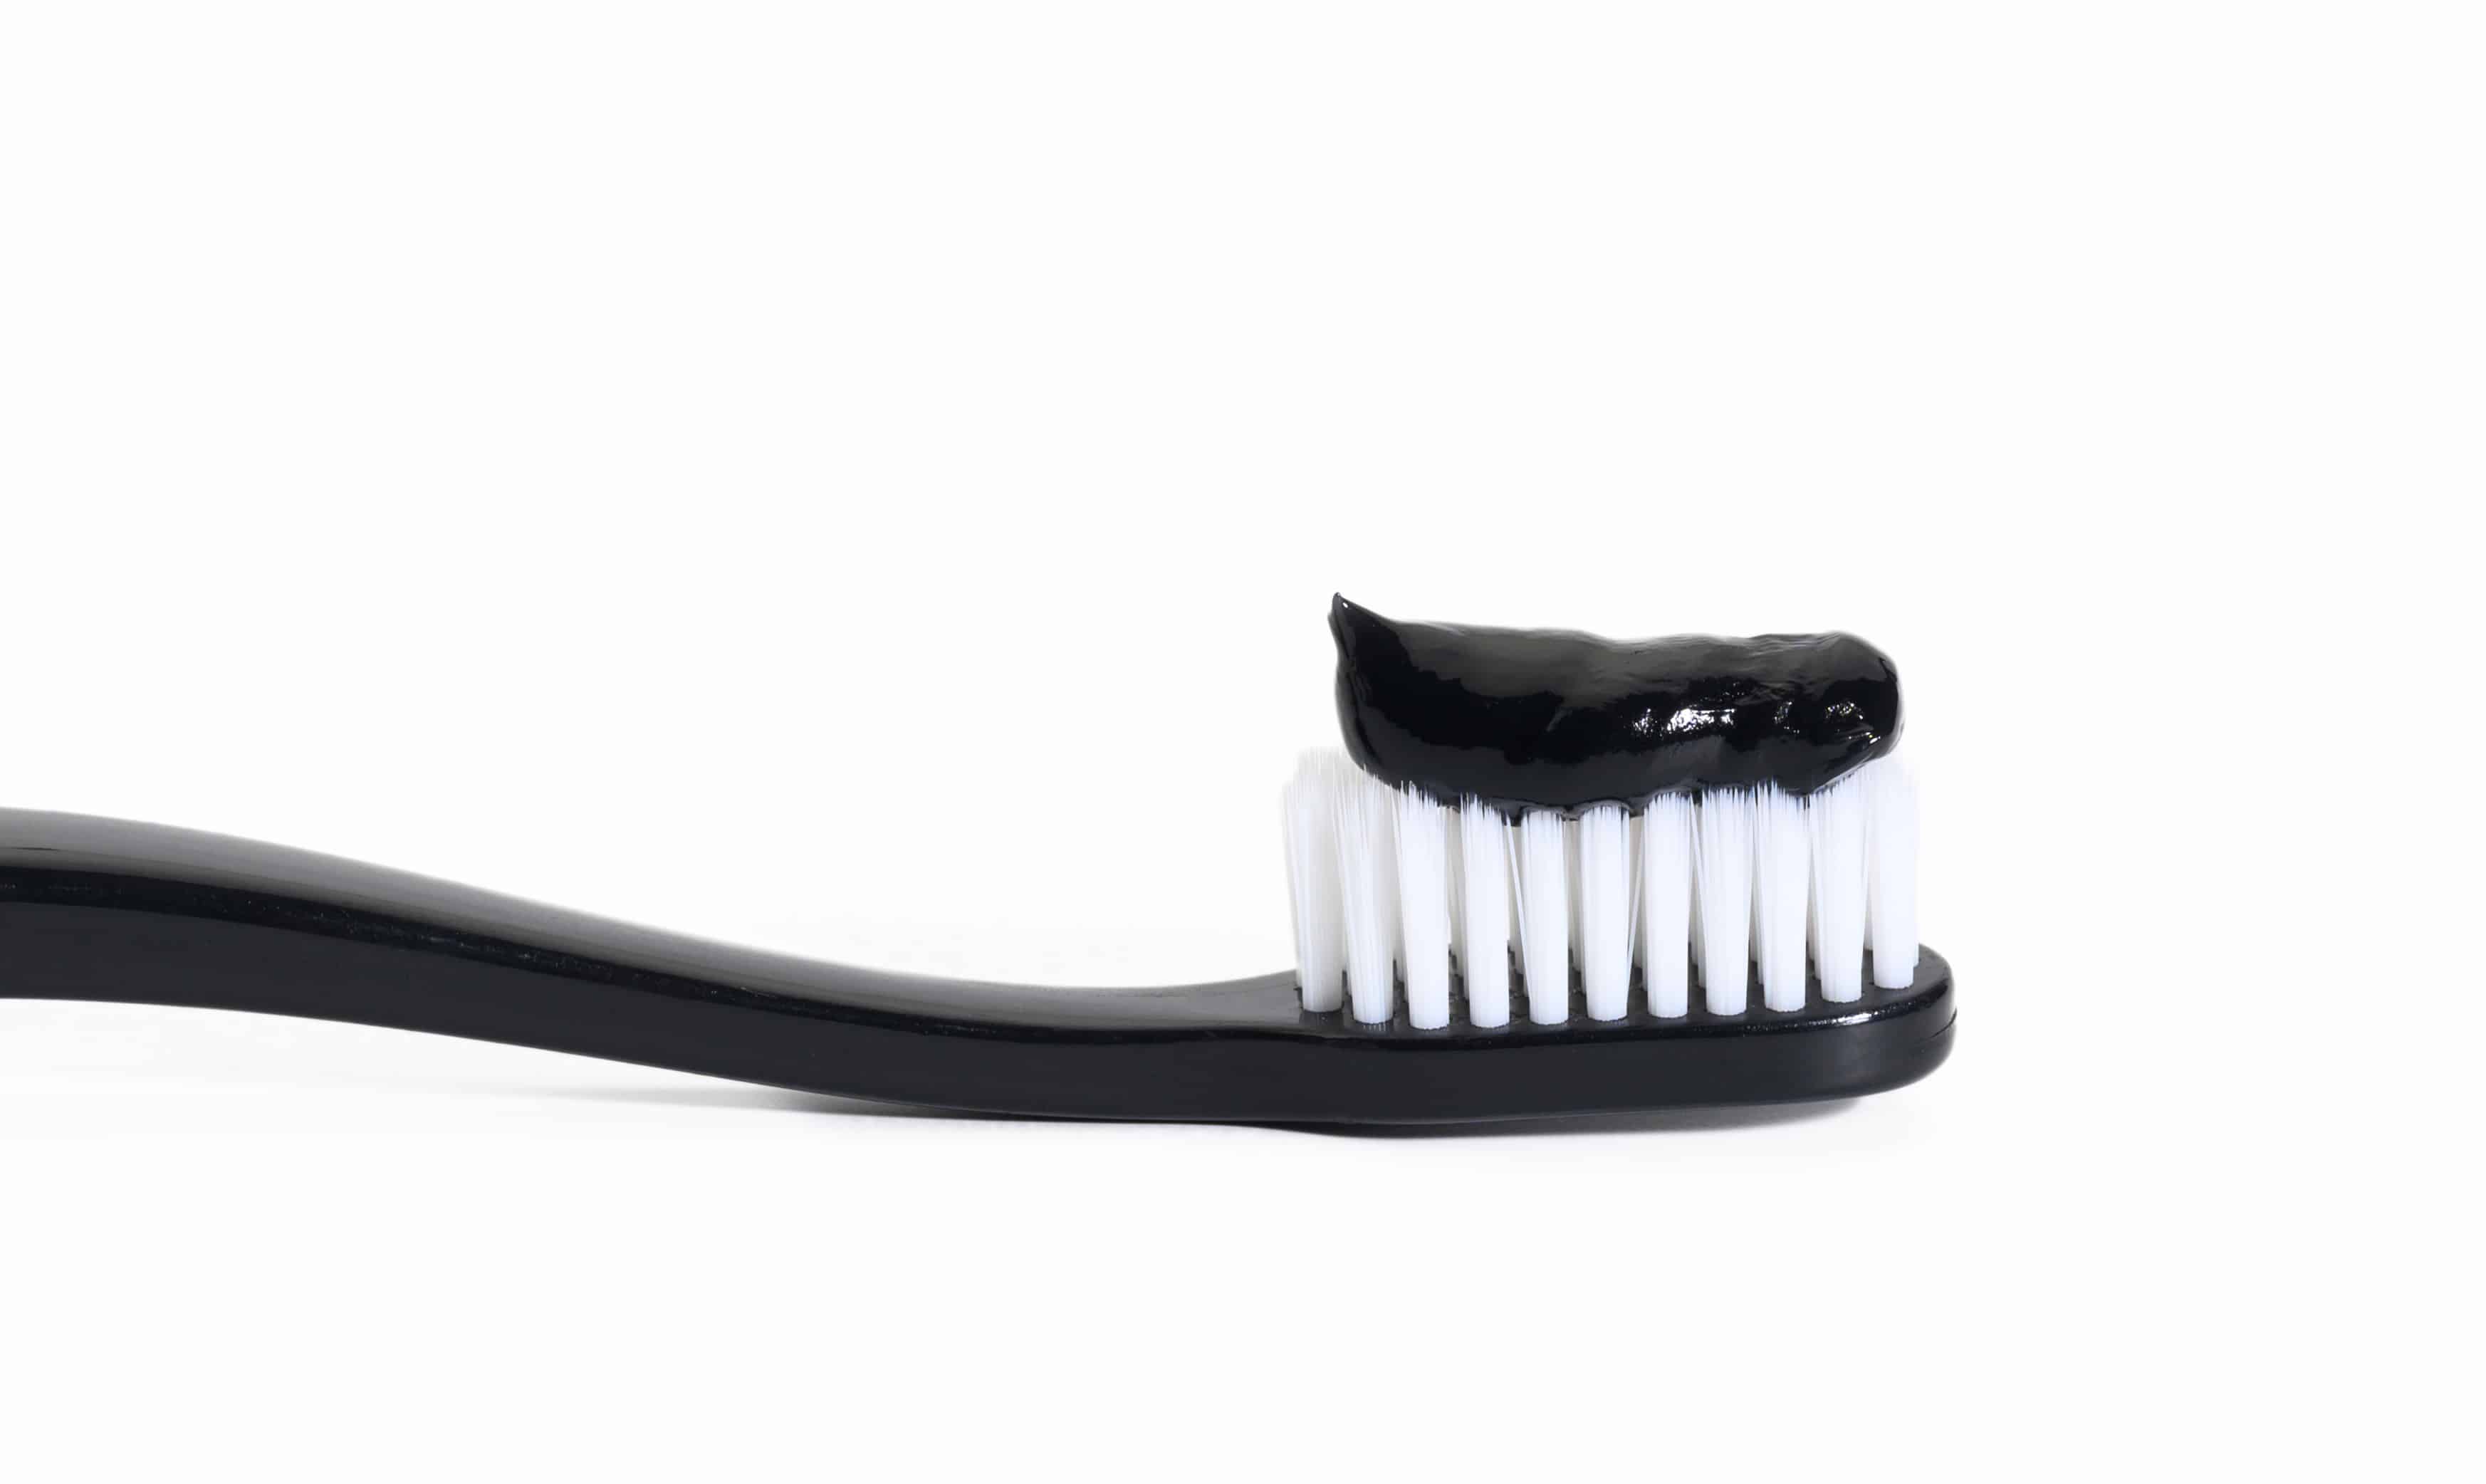 black plastic toothbrush with black charcoal paste on white background